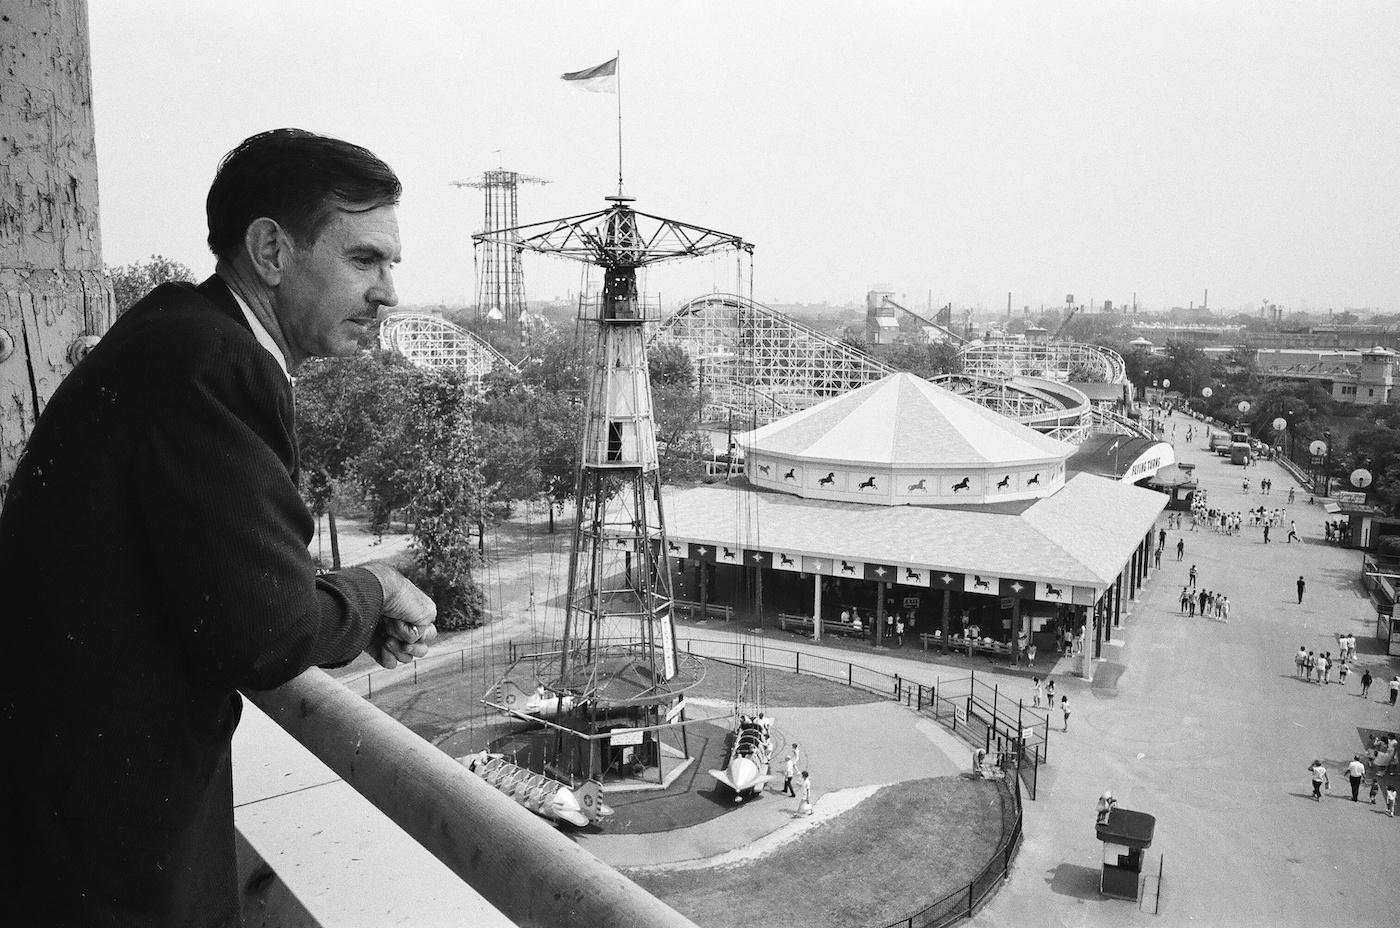 William Schmidt at his amusement park Riverview in Chicago. Photo: ST-90004580-0003, Chicago Sun-Times collection, Chicago History Museum